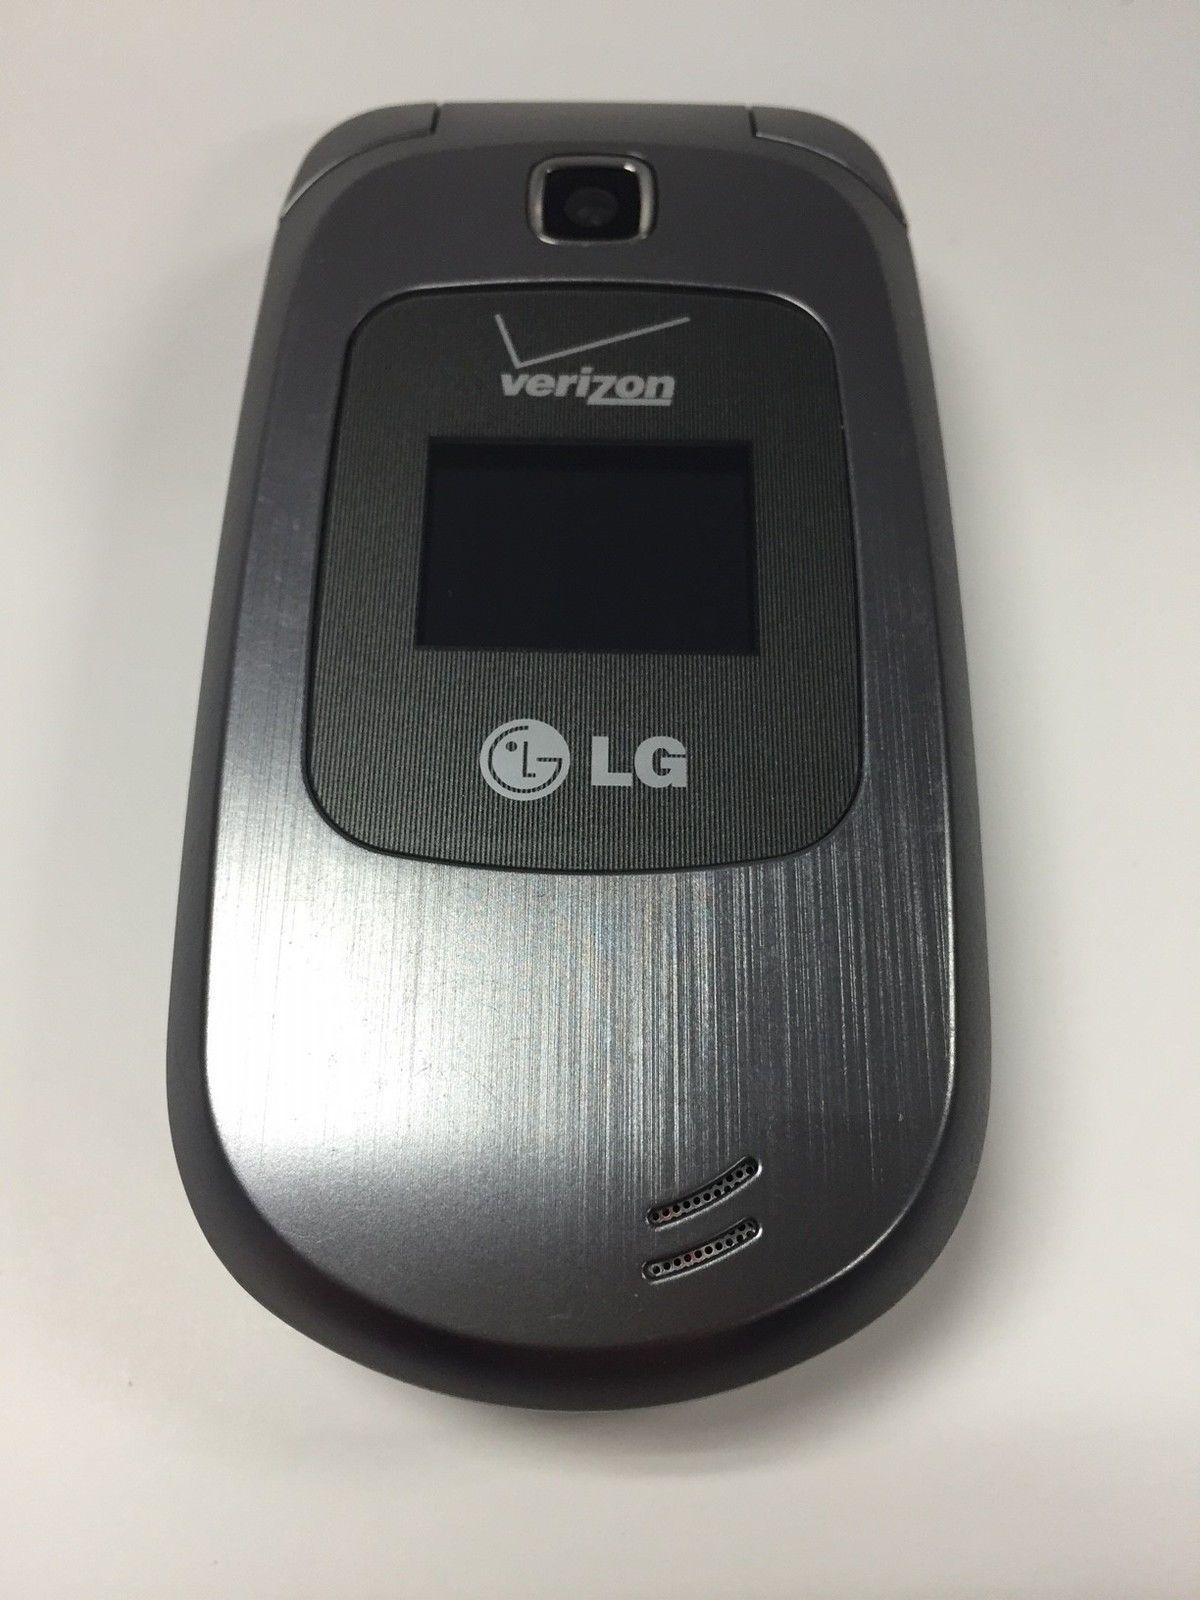 Primary image for Verizon LG VN150 Revere No Contract Grey CDMA Camera Cell Phone 